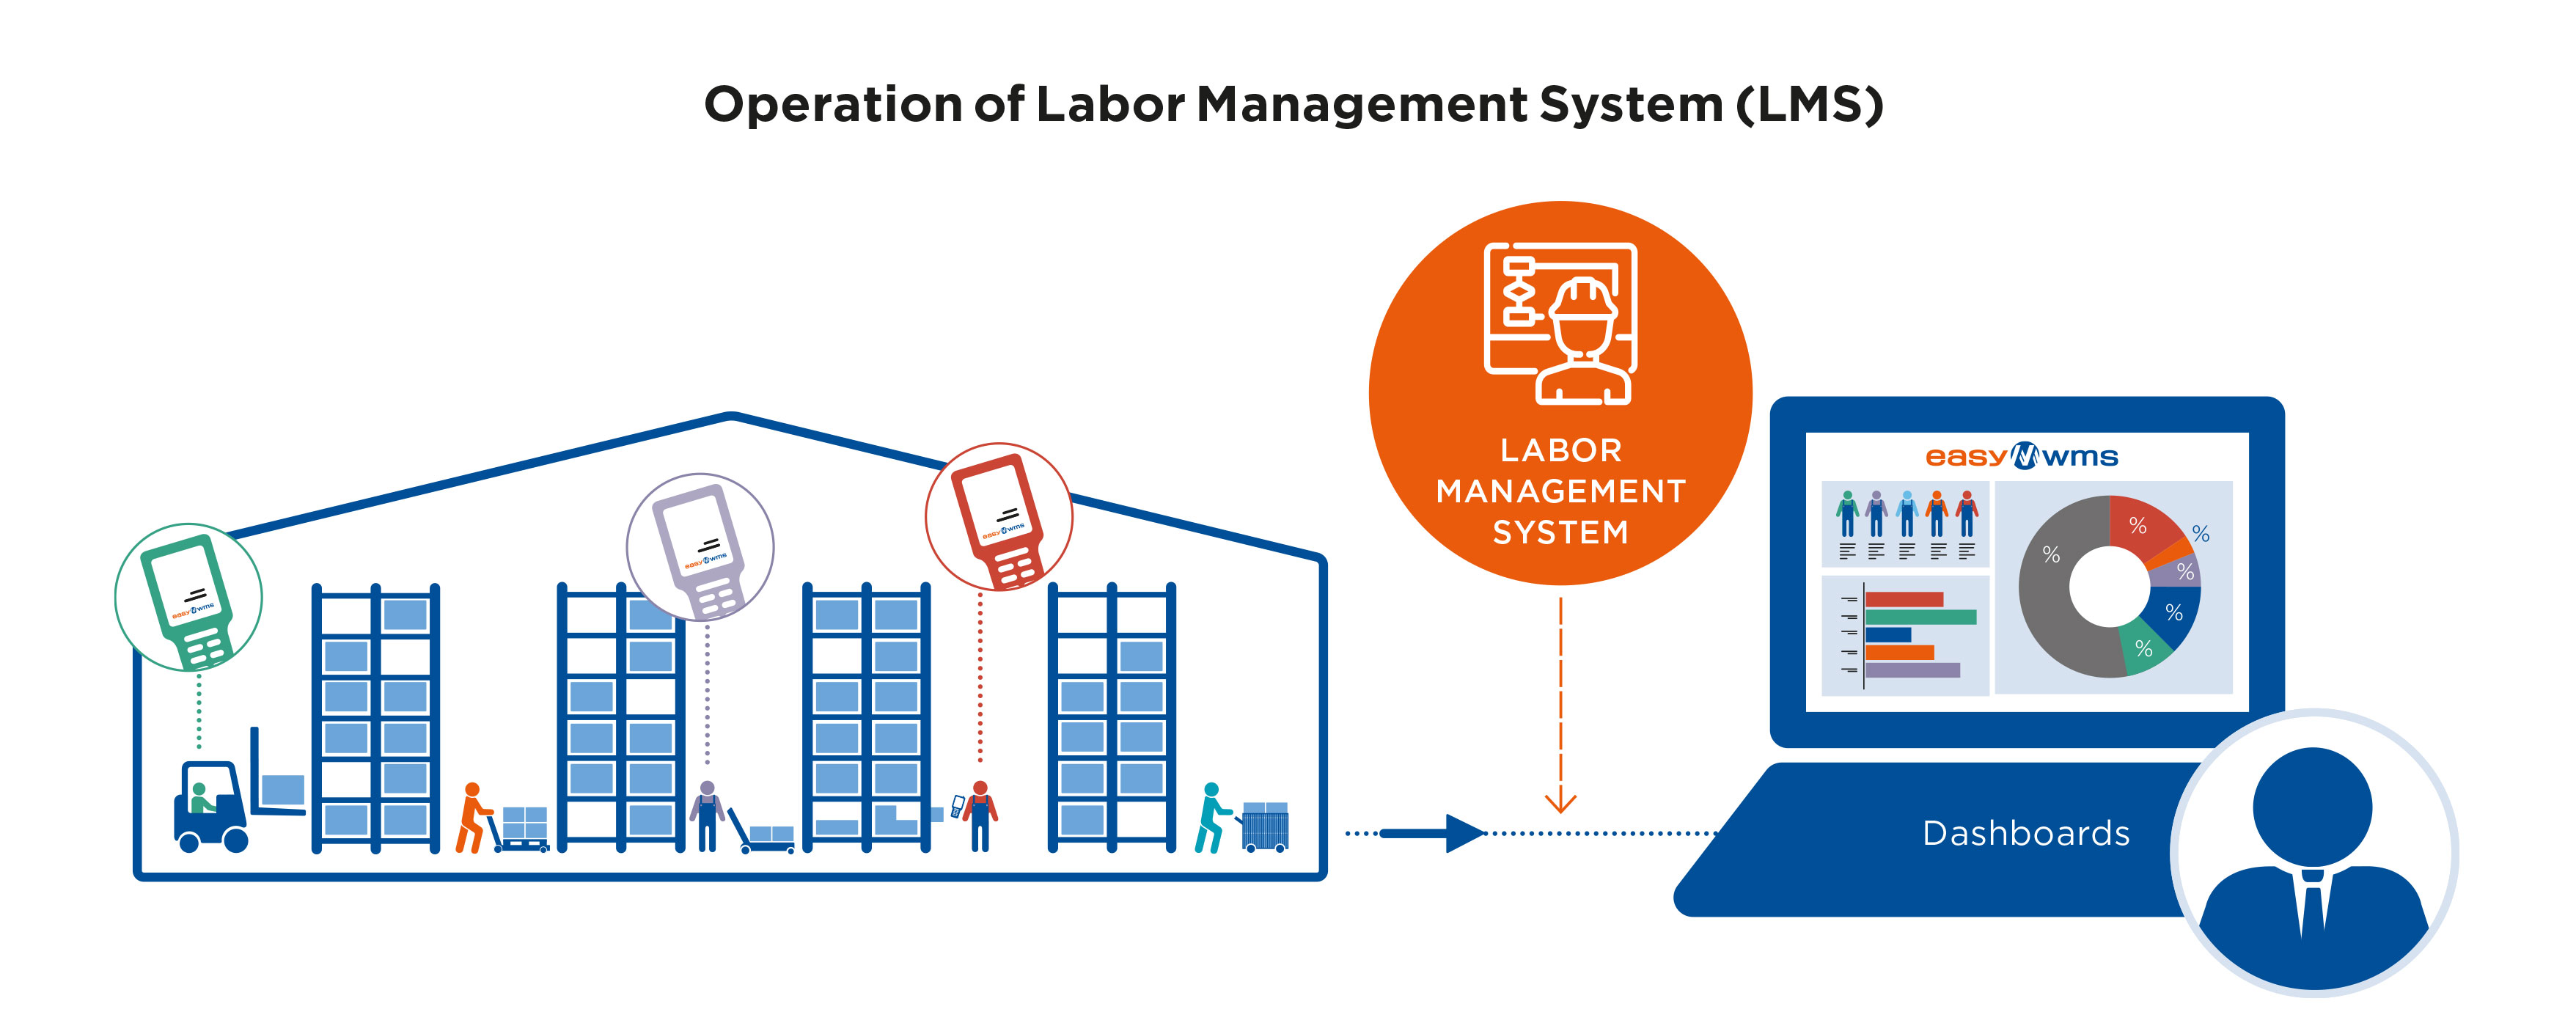 Operation of Labor Management System (LMS)